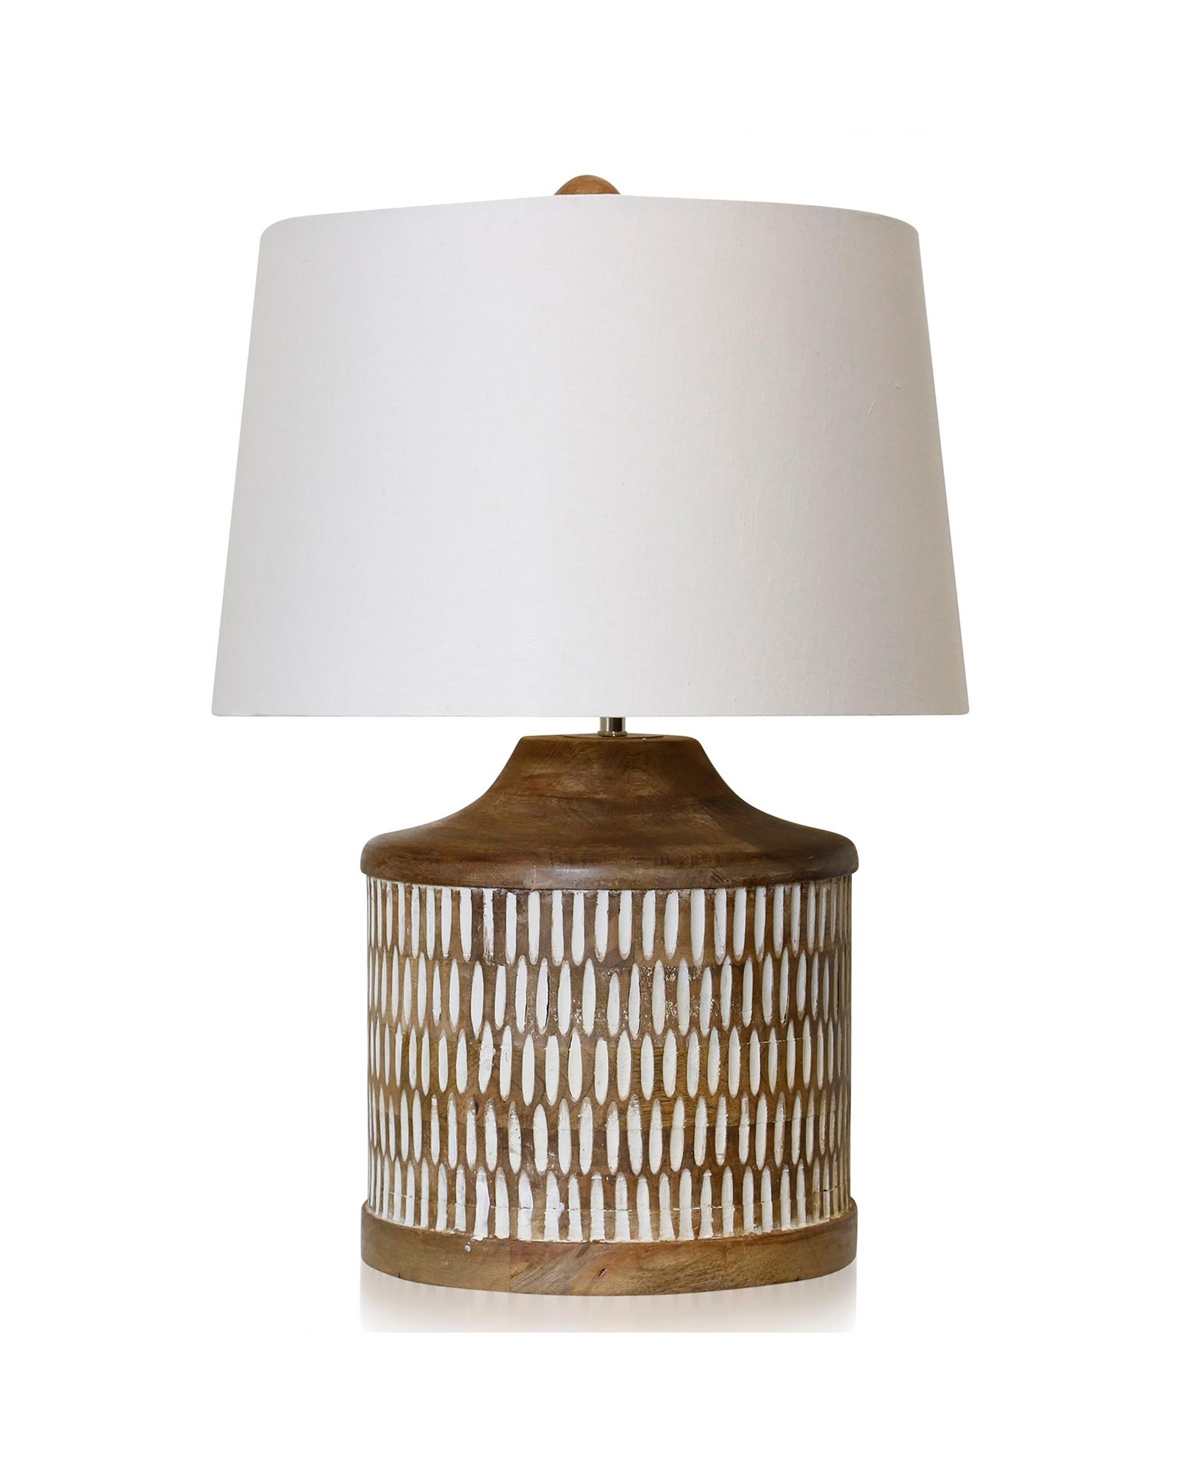 Stylecraft Home Collection 20" Carved Wood Table Lamp With Painted Accents In Natural,white Wash,white